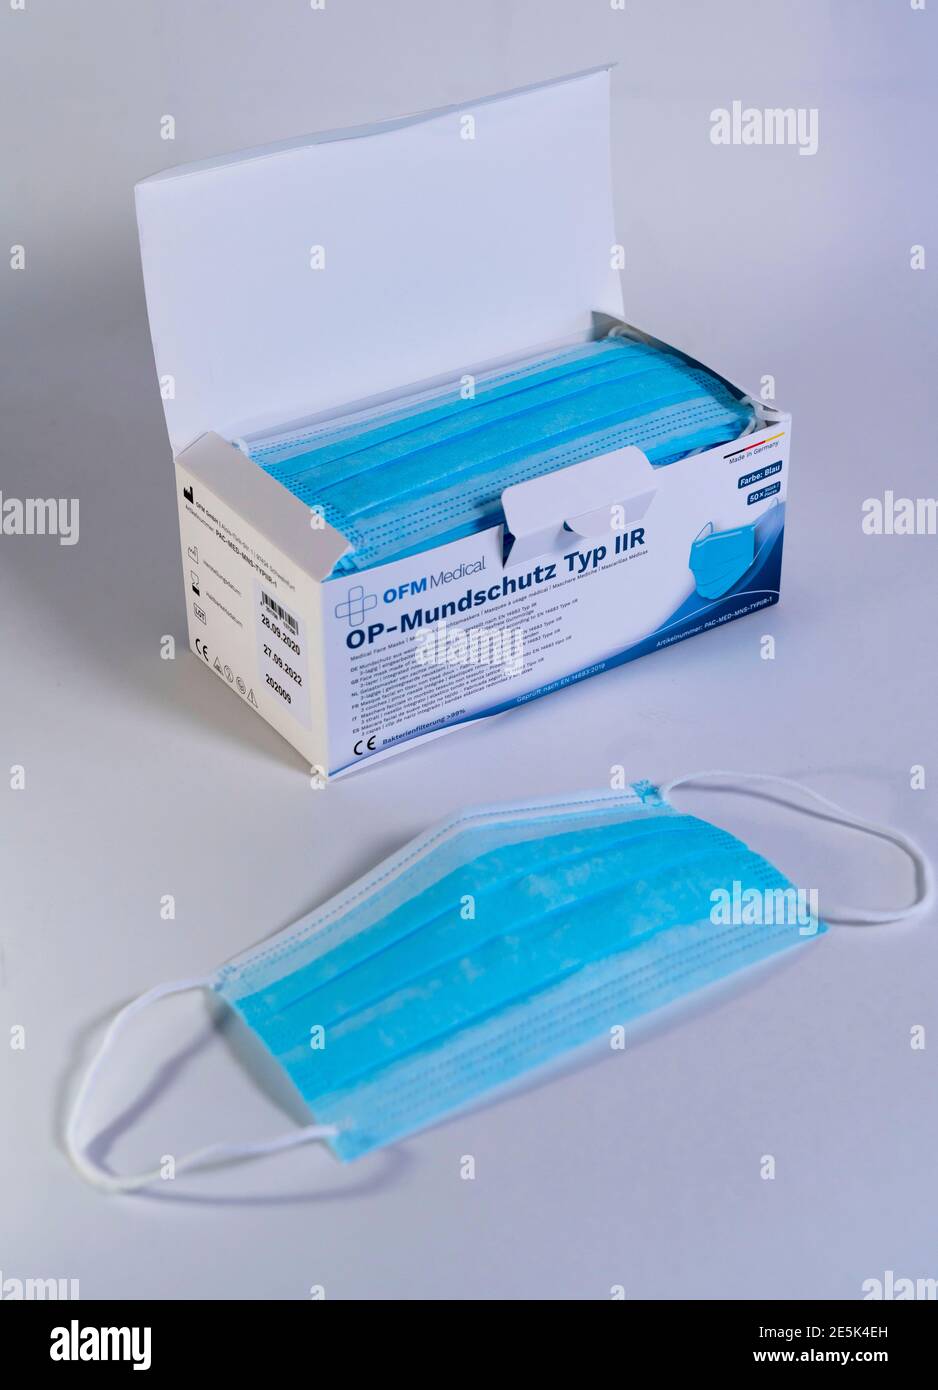 Pack of surgical mouth masks, with CE marking, Stock Photo